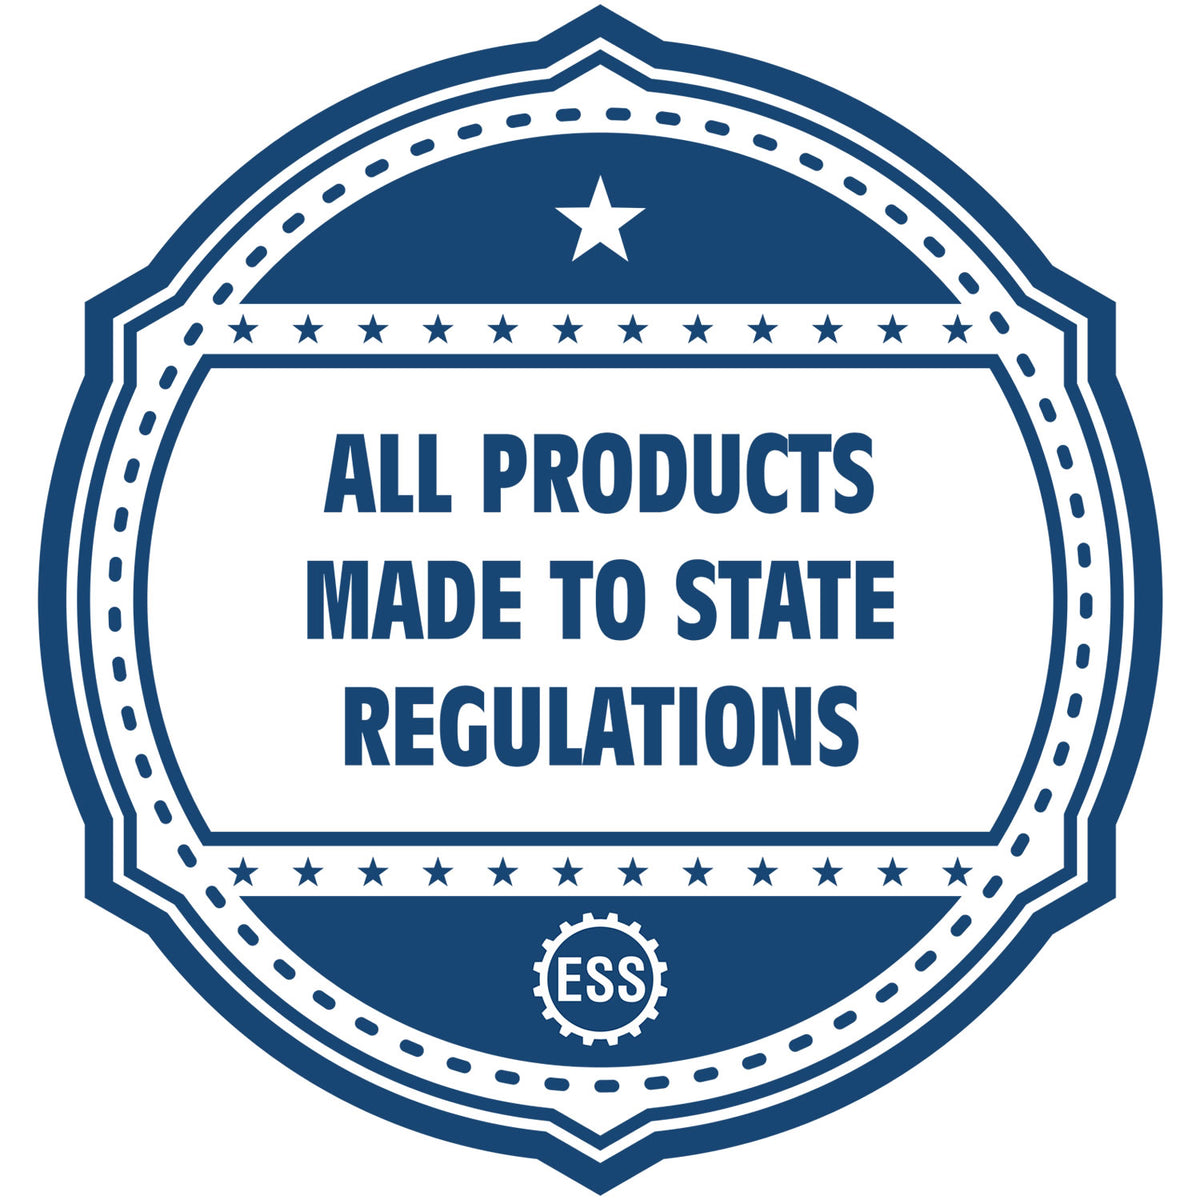 An icon or badge element for the MaxLight Premium Pre-Inked Pennsylvania Rectangular Notarial Stamp showing that this product is made in compliance with state regulations.